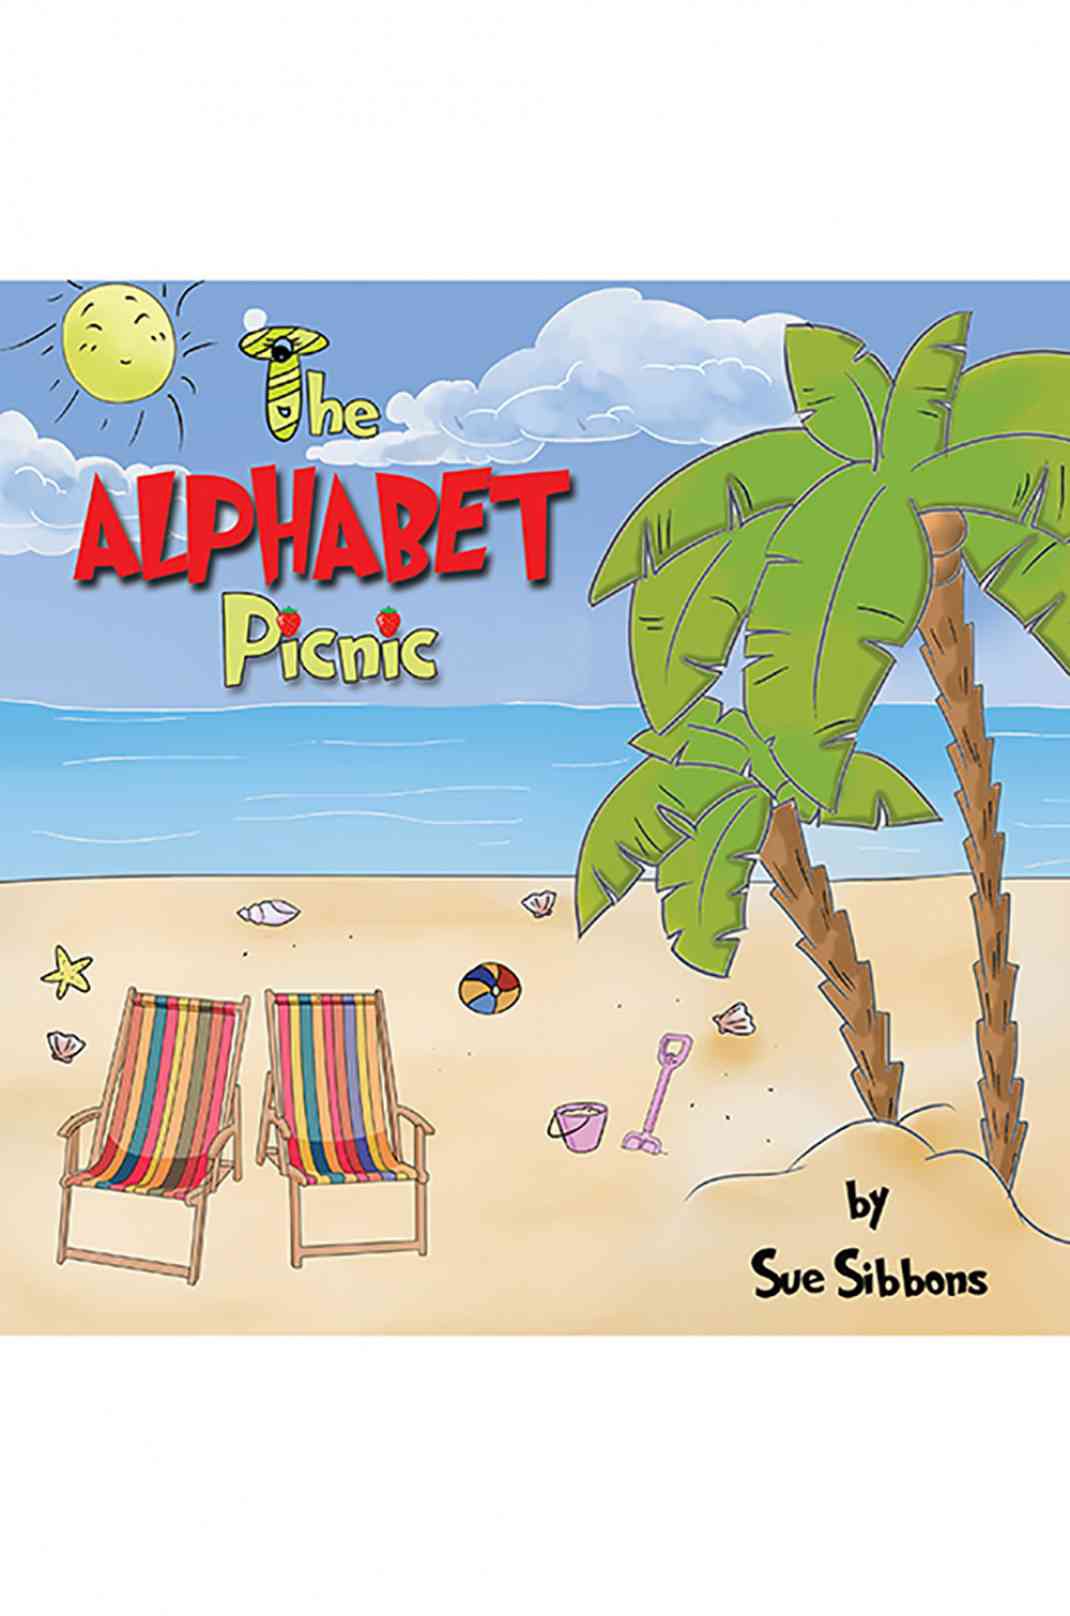 ‘The Alphabet Picnic’ by Sue Sibbons selected in The People’s Book Prize, of 2018/19